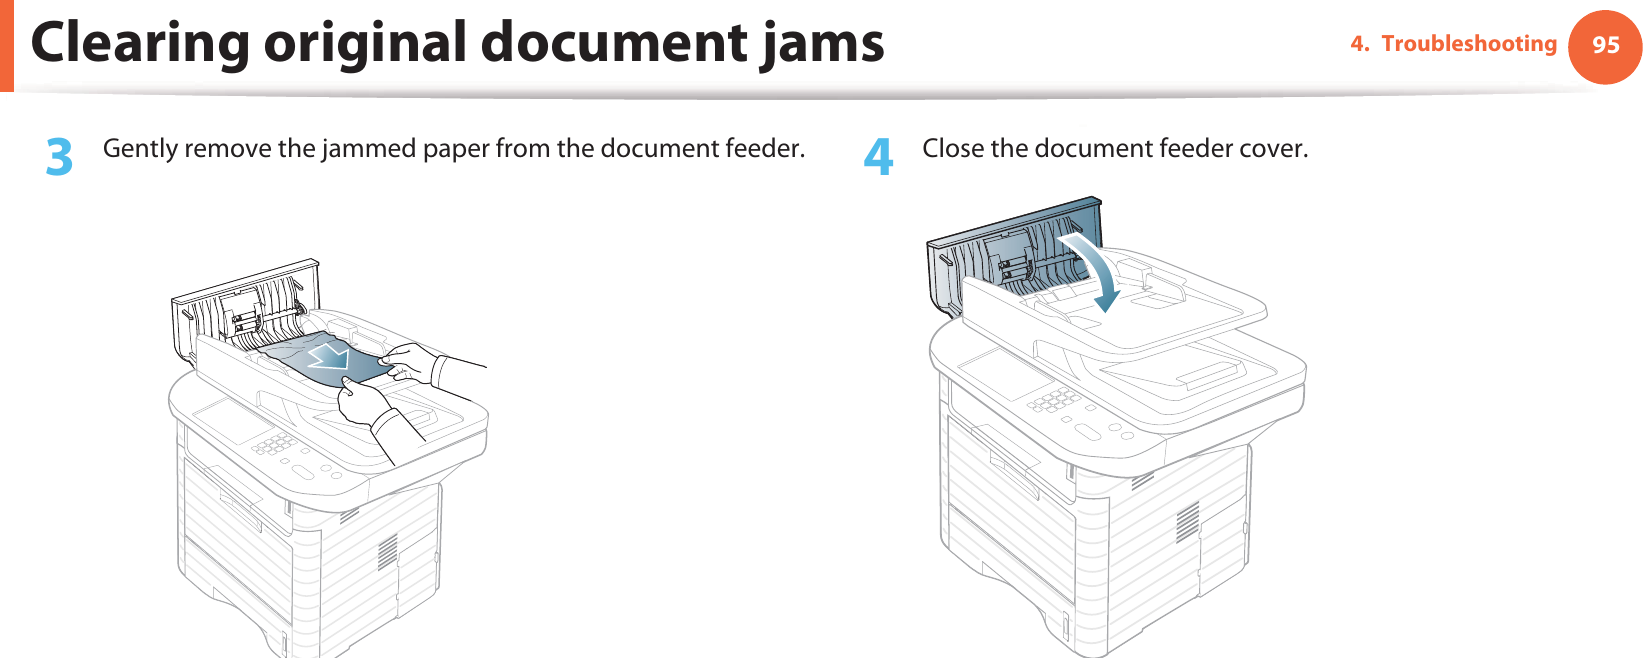 Clearing original document jams 954. Troubleshooting3  Gently remove the jammed paper from the document feeder. 4  Close the document feeder cover.